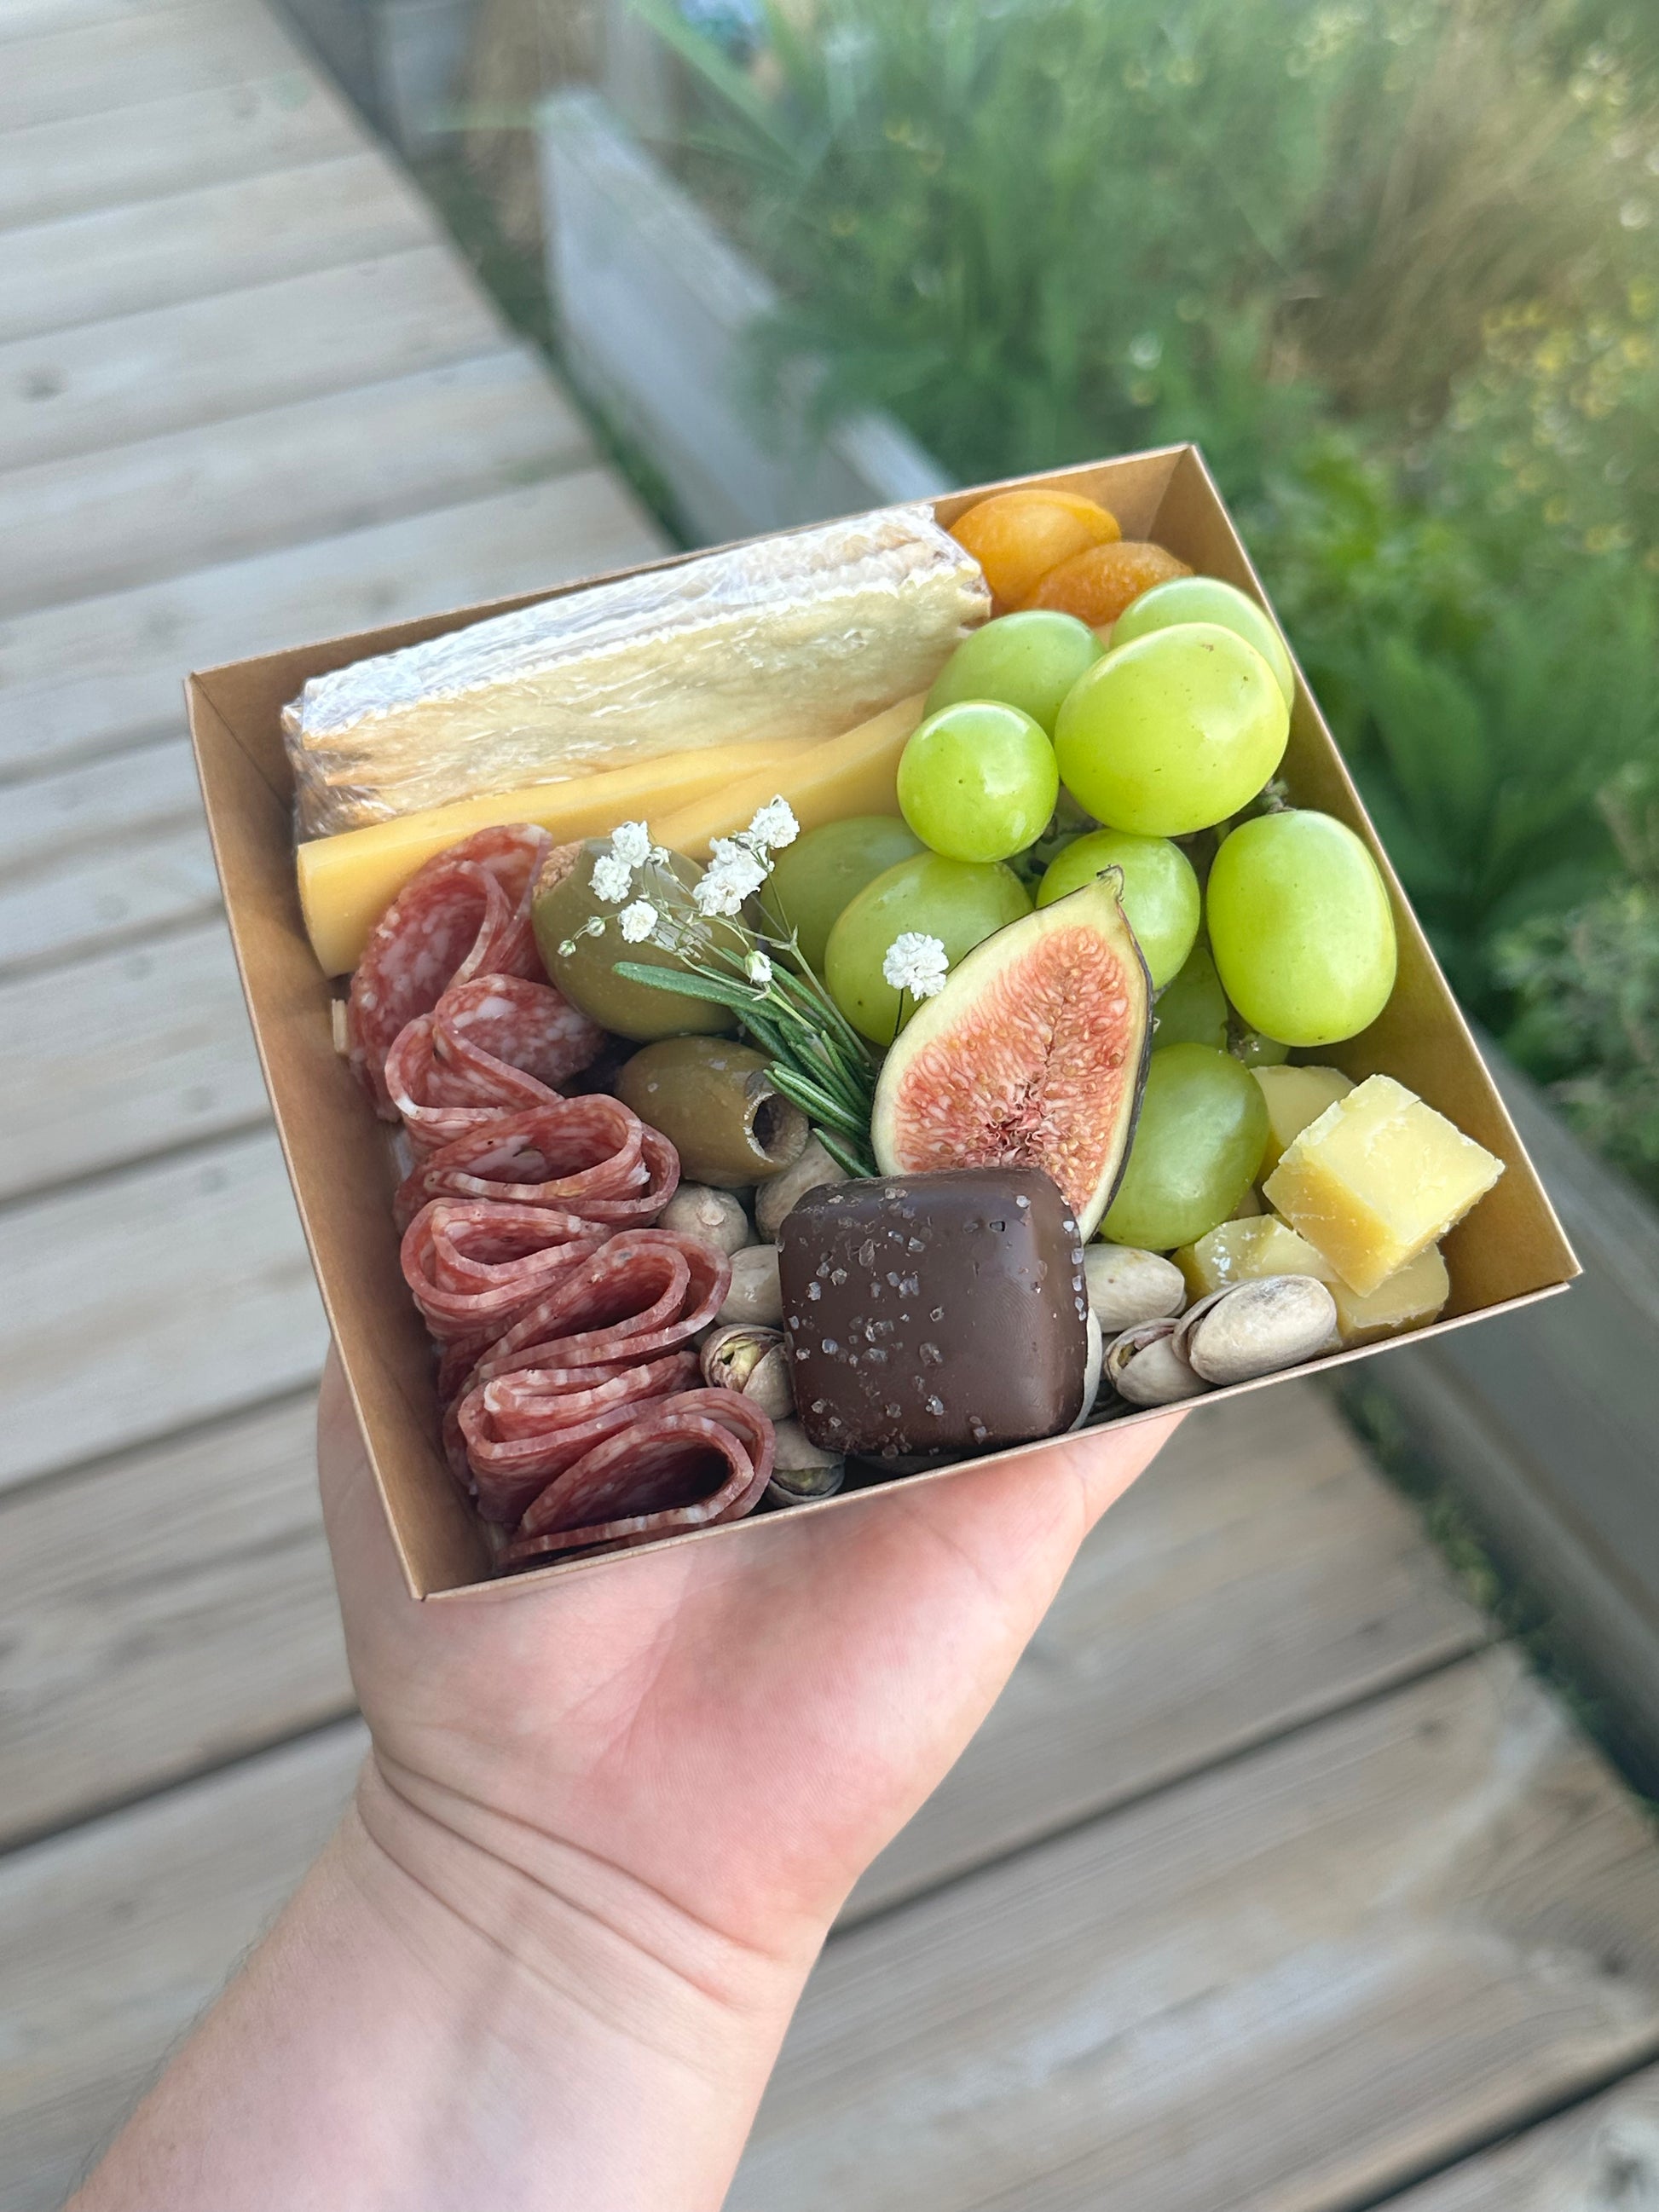 Mini Charcuterie Boxes - Like a Grown Up Lunchable!